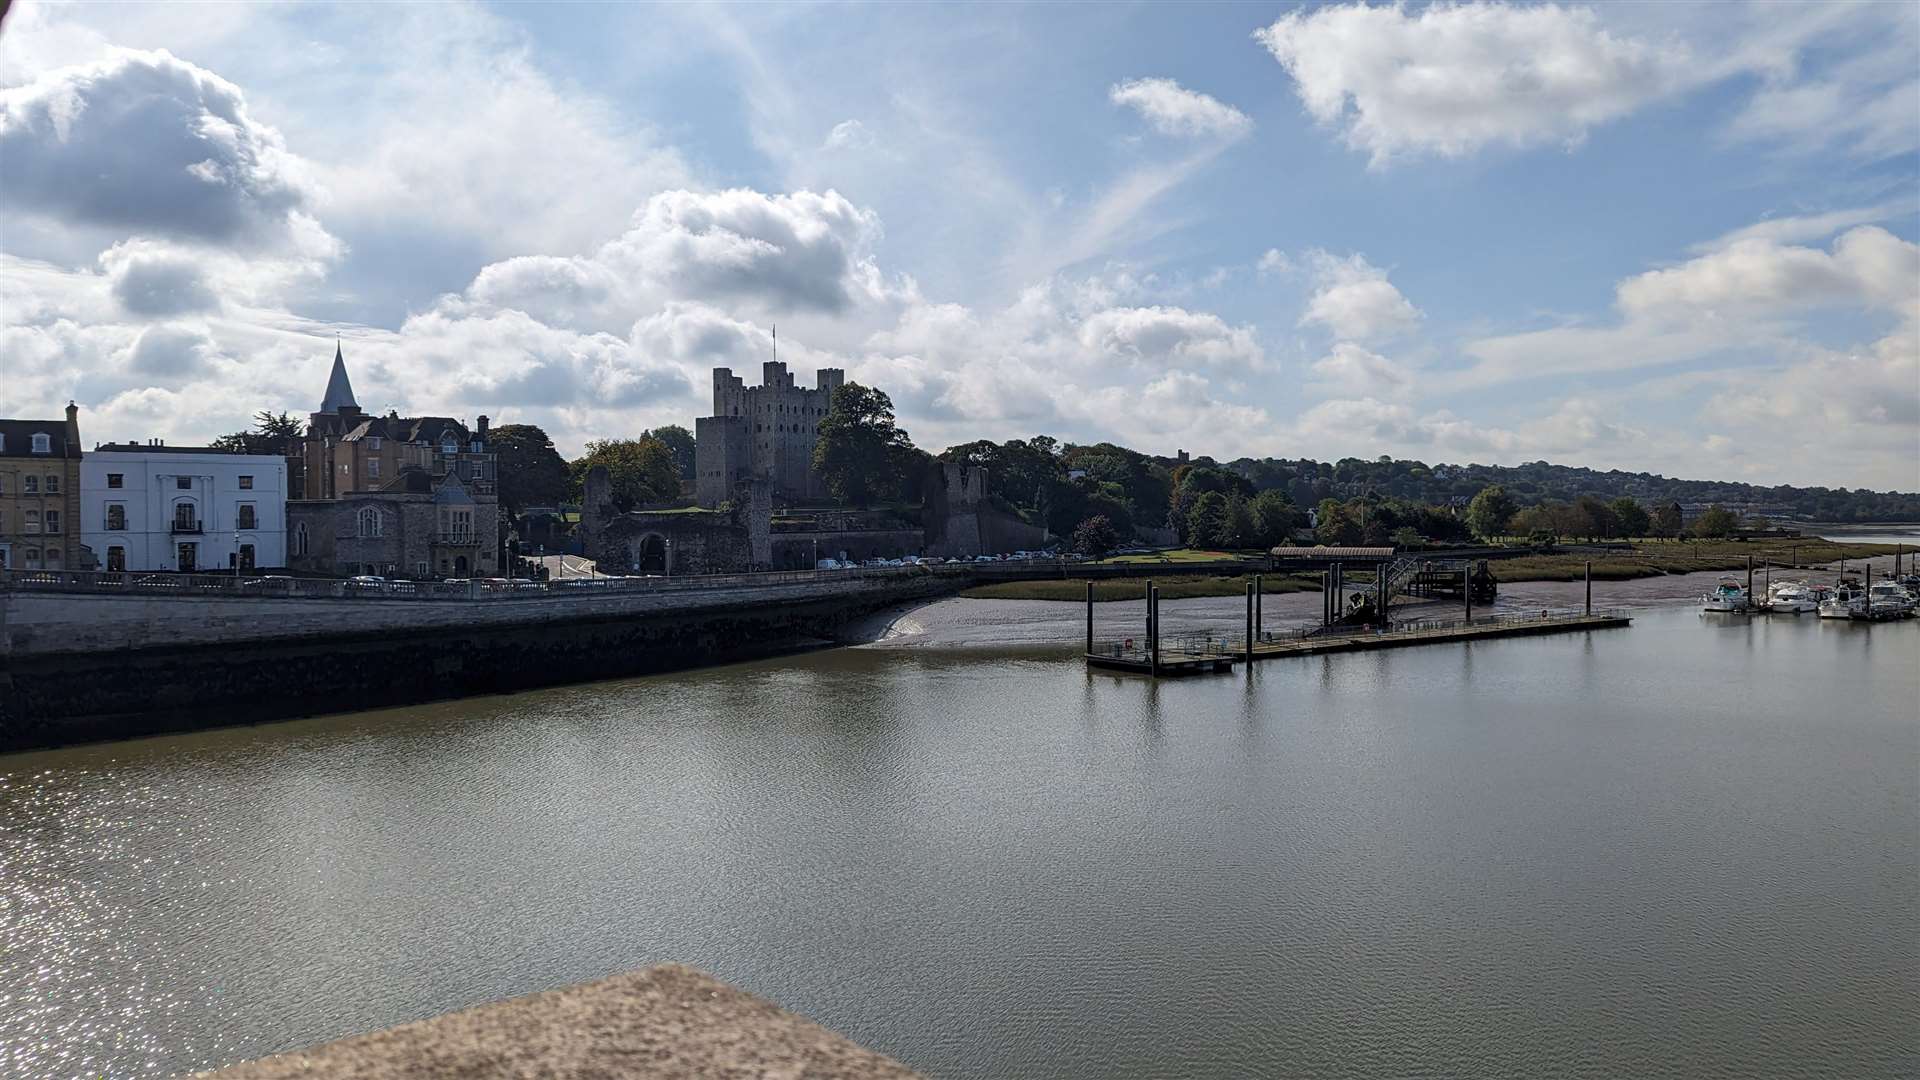 Looking towards Rochester Castle from Rochester Bridge